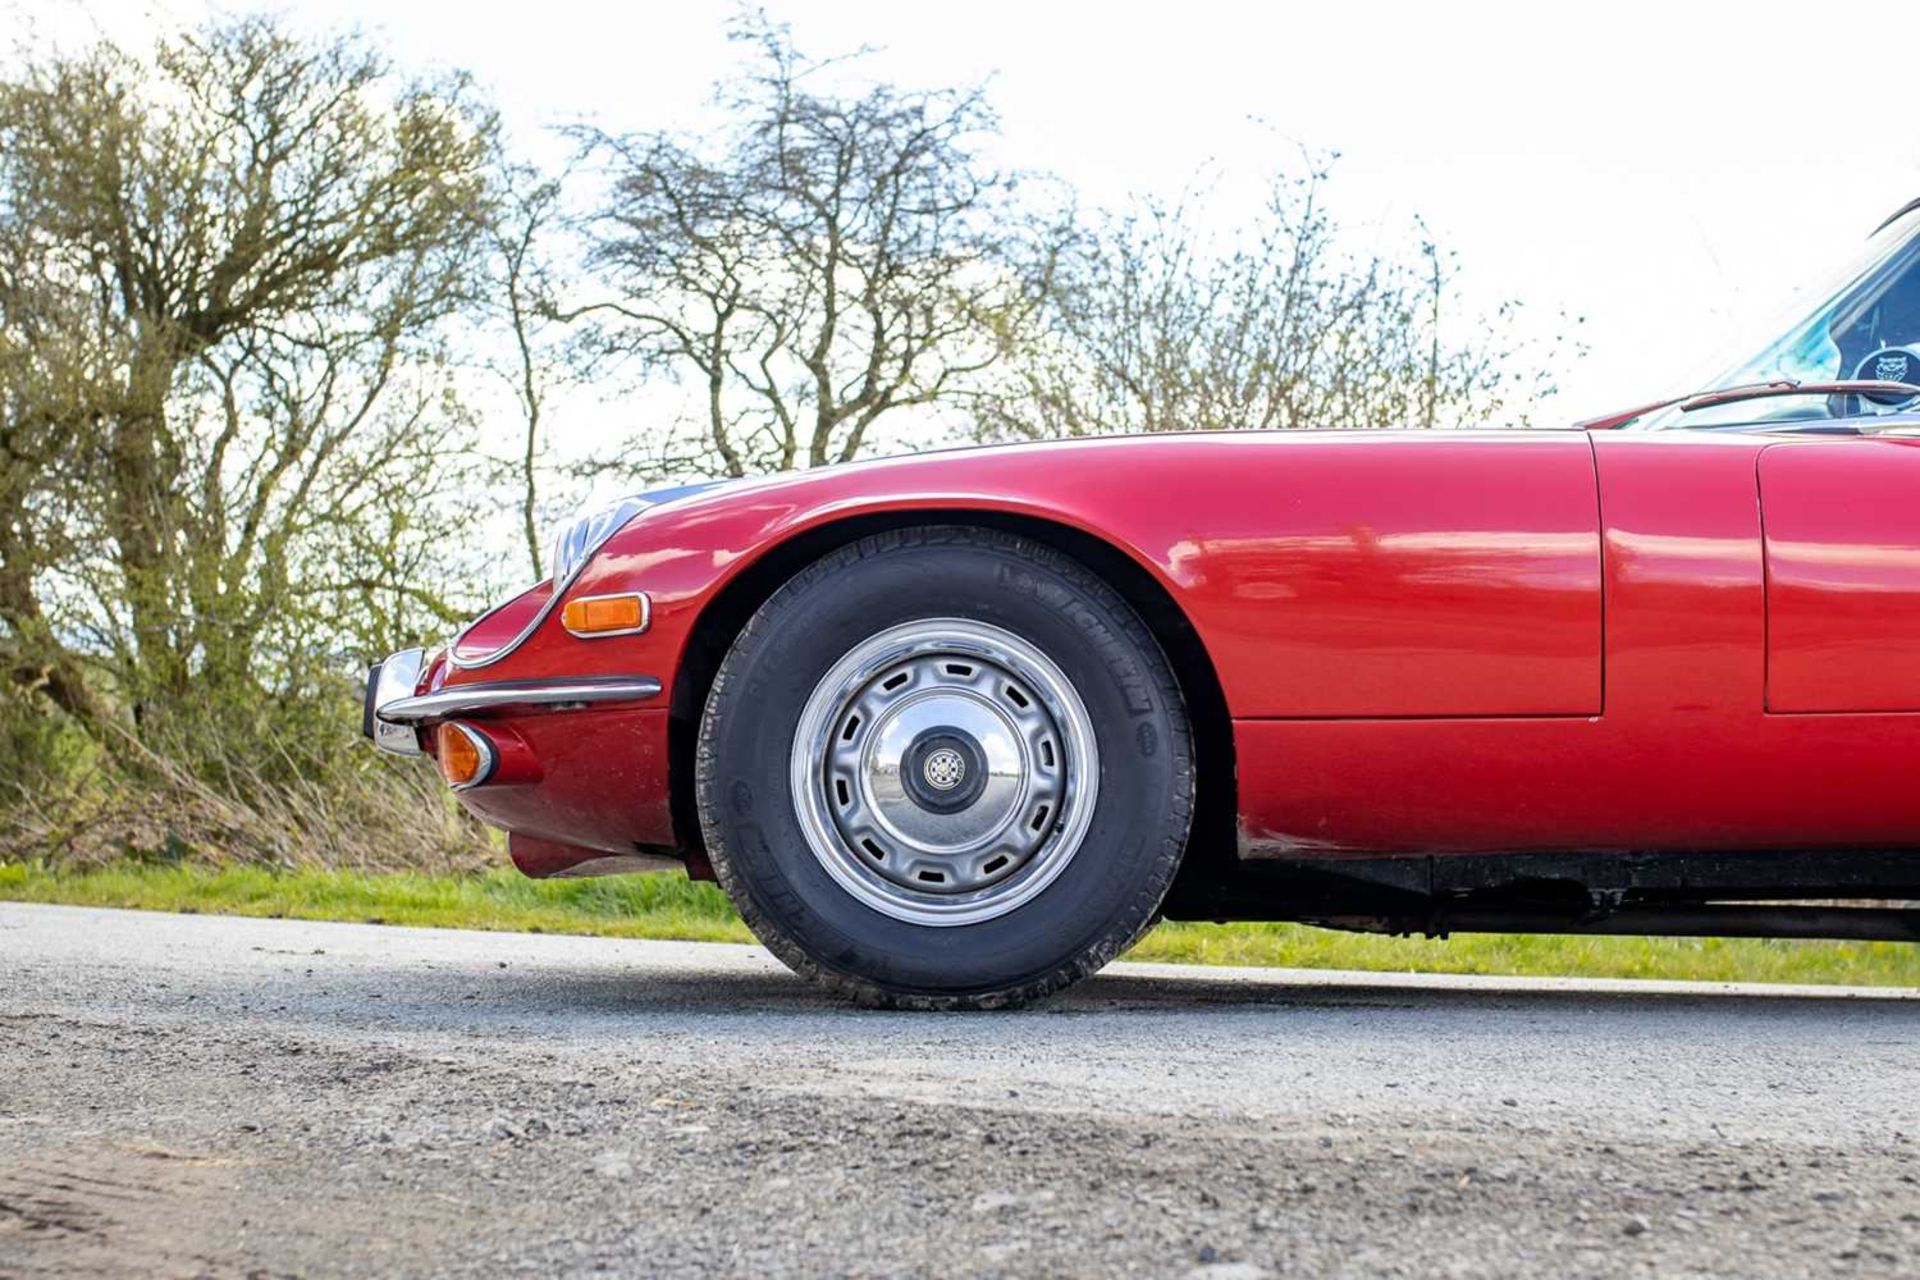 1973 Jaguar E-Type Coupe 5.3 V12 Three owners from new - Image 16 of 79